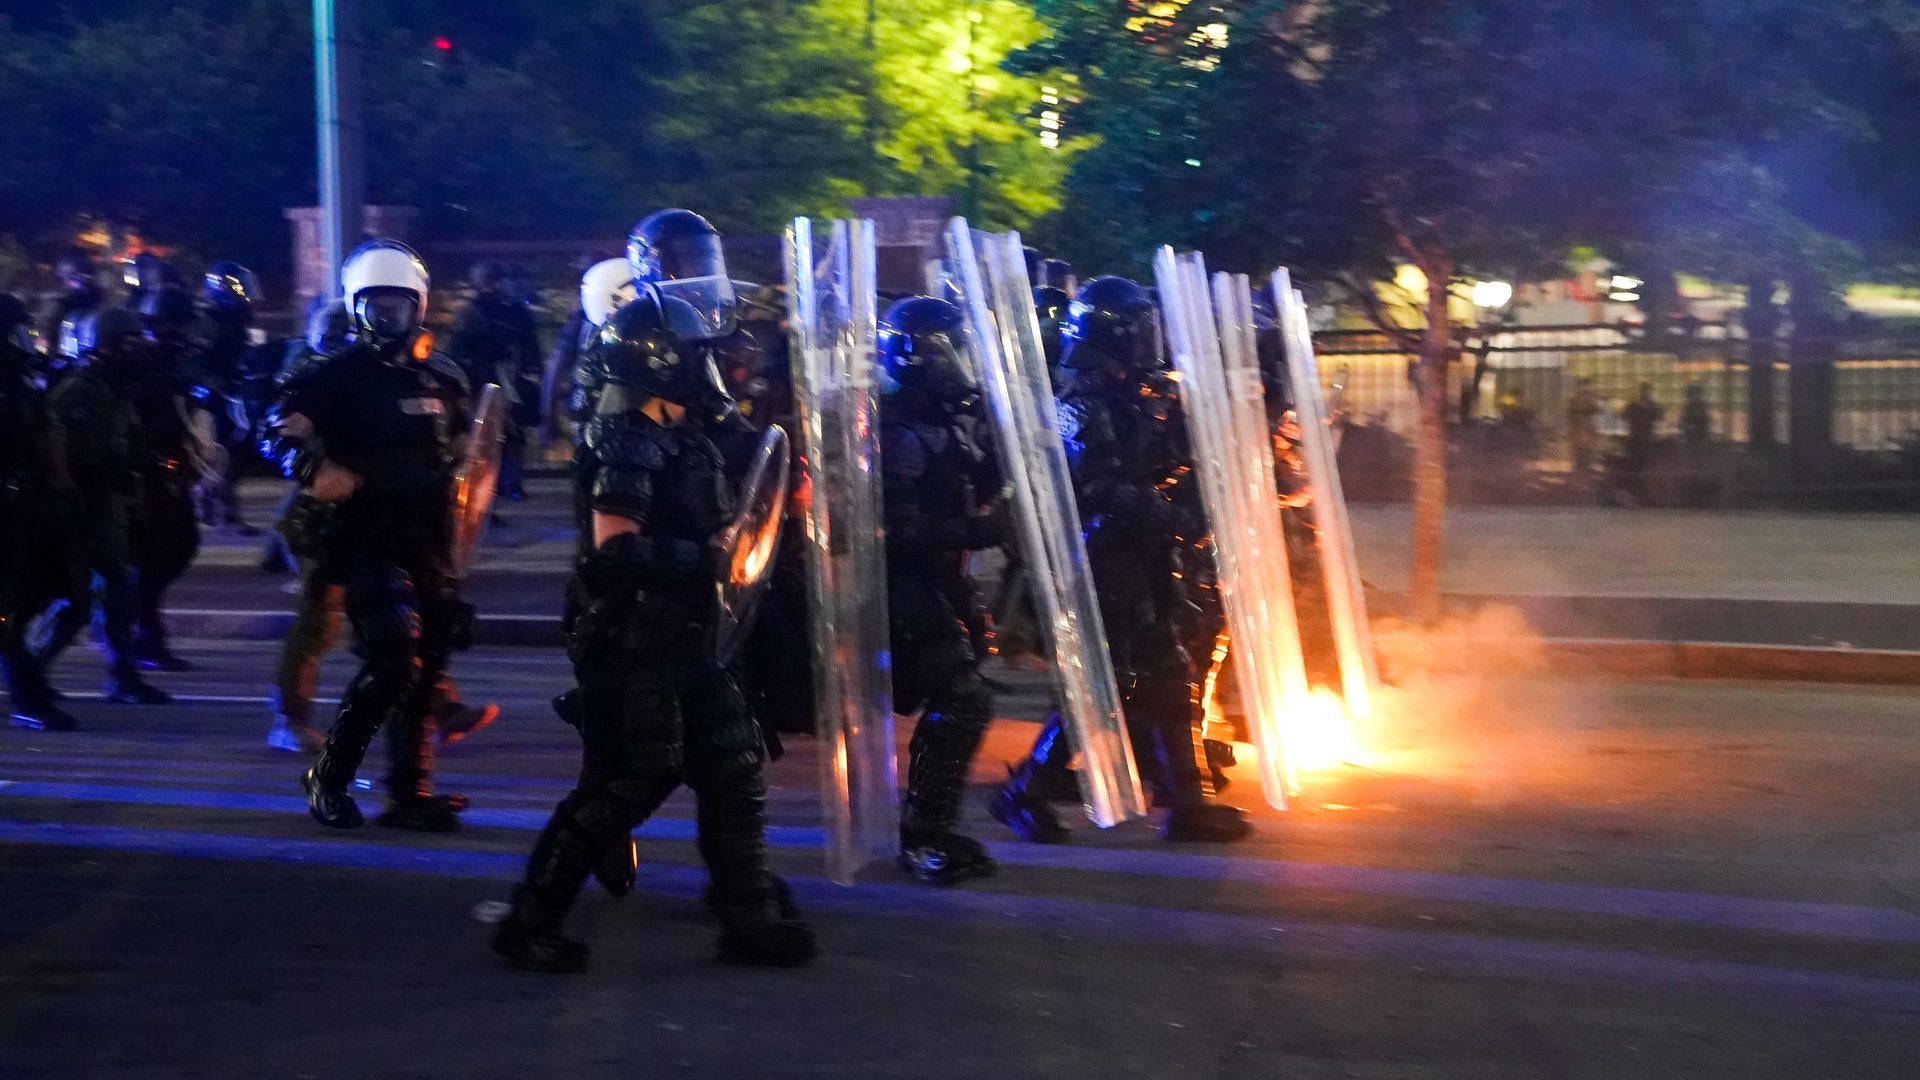 Police officers advance after firing tear gas during a demonstration on May 31, 2020 in Atlanta, Georgia.